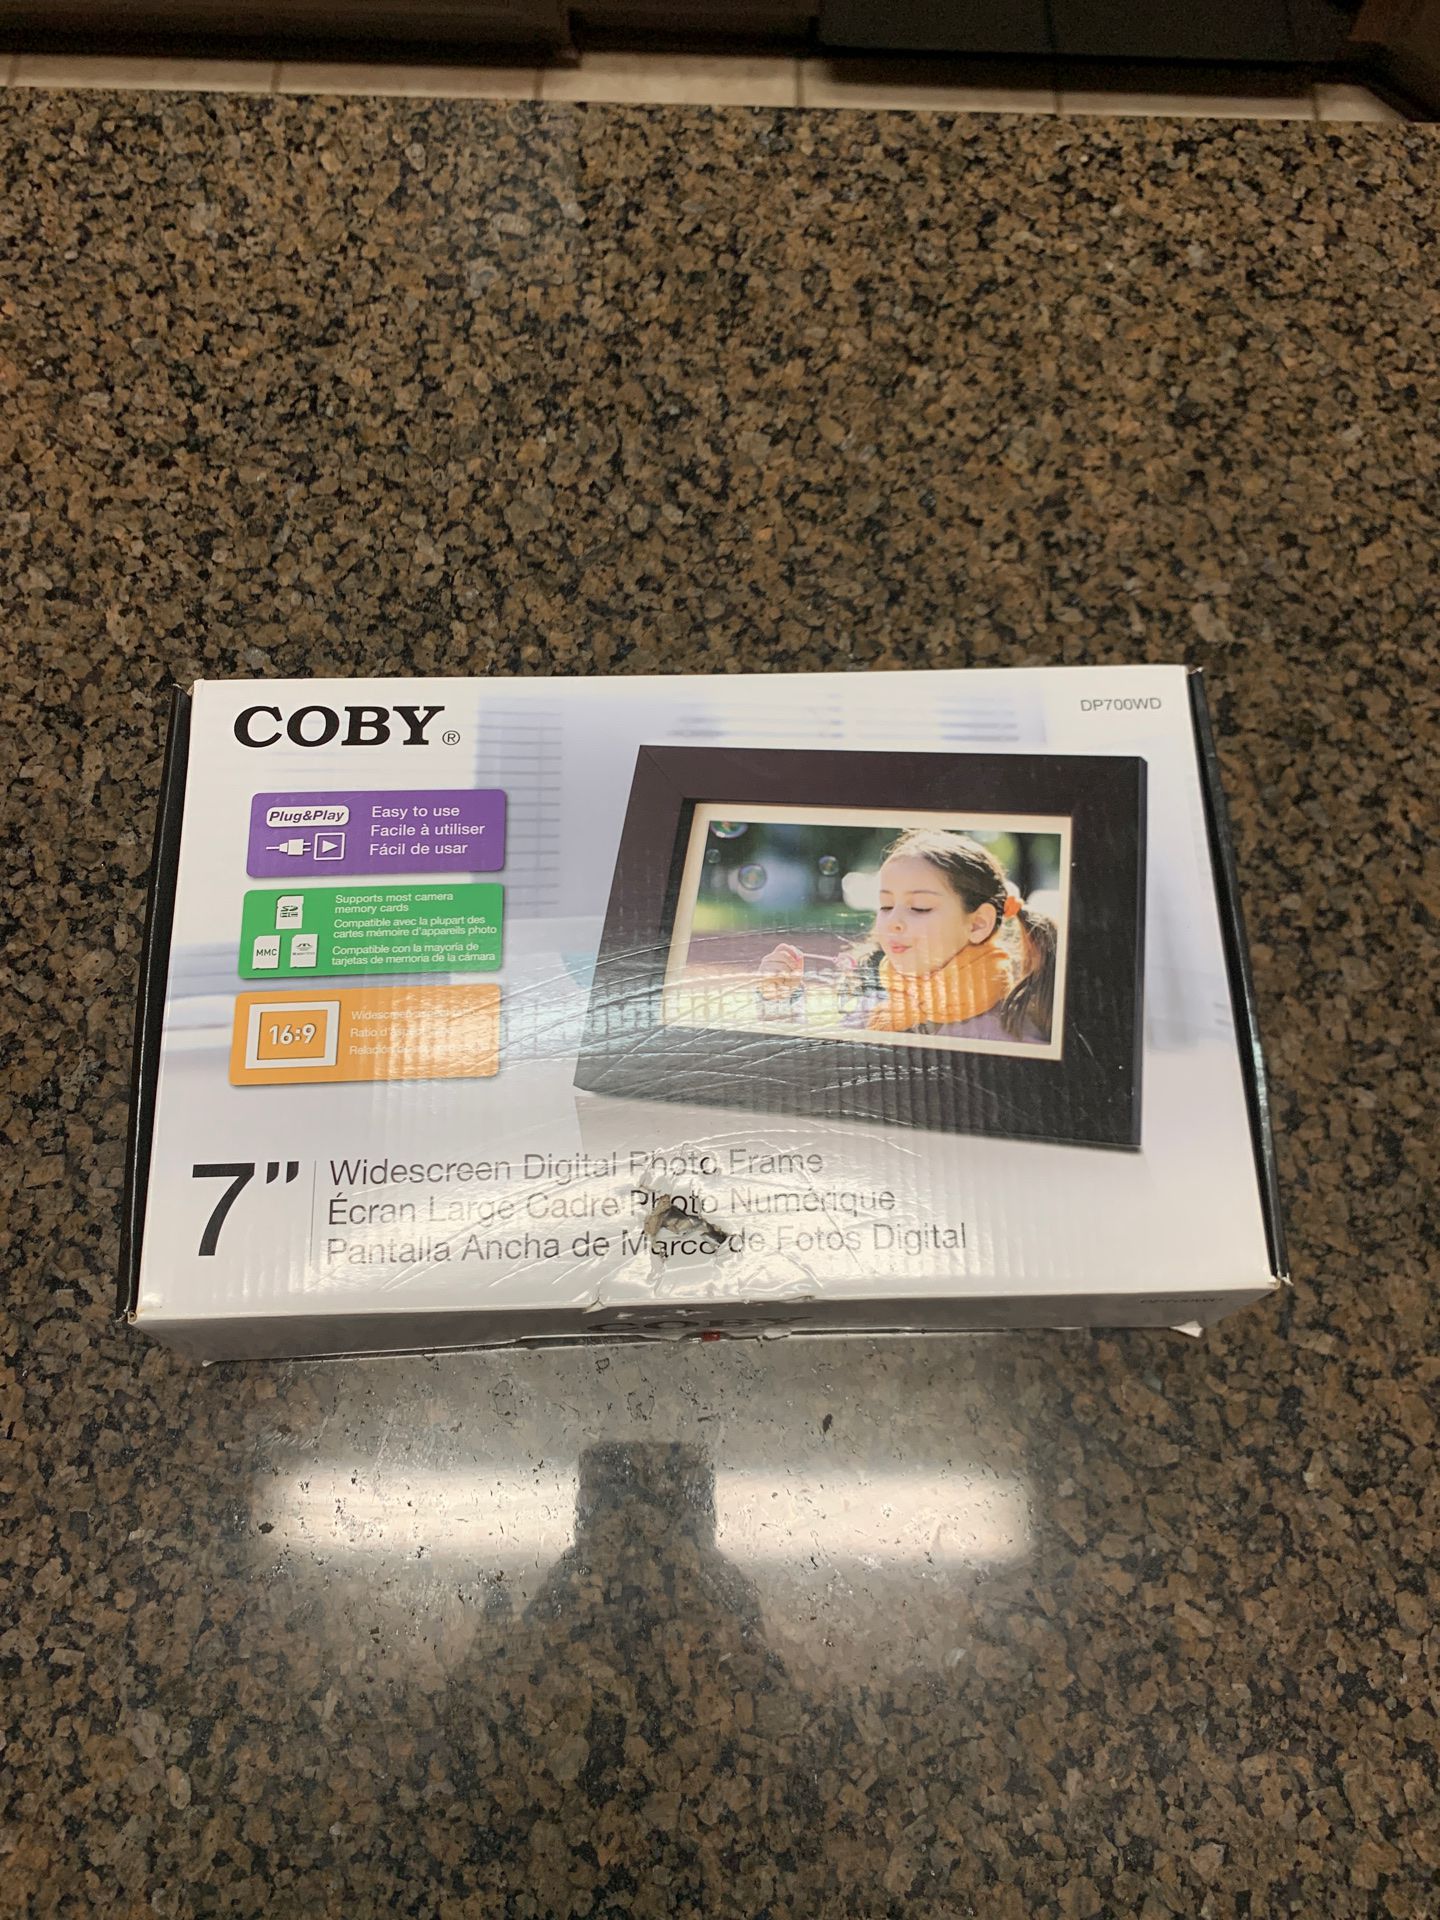 Coby 7” widescreen digital photo frame. New in Box.